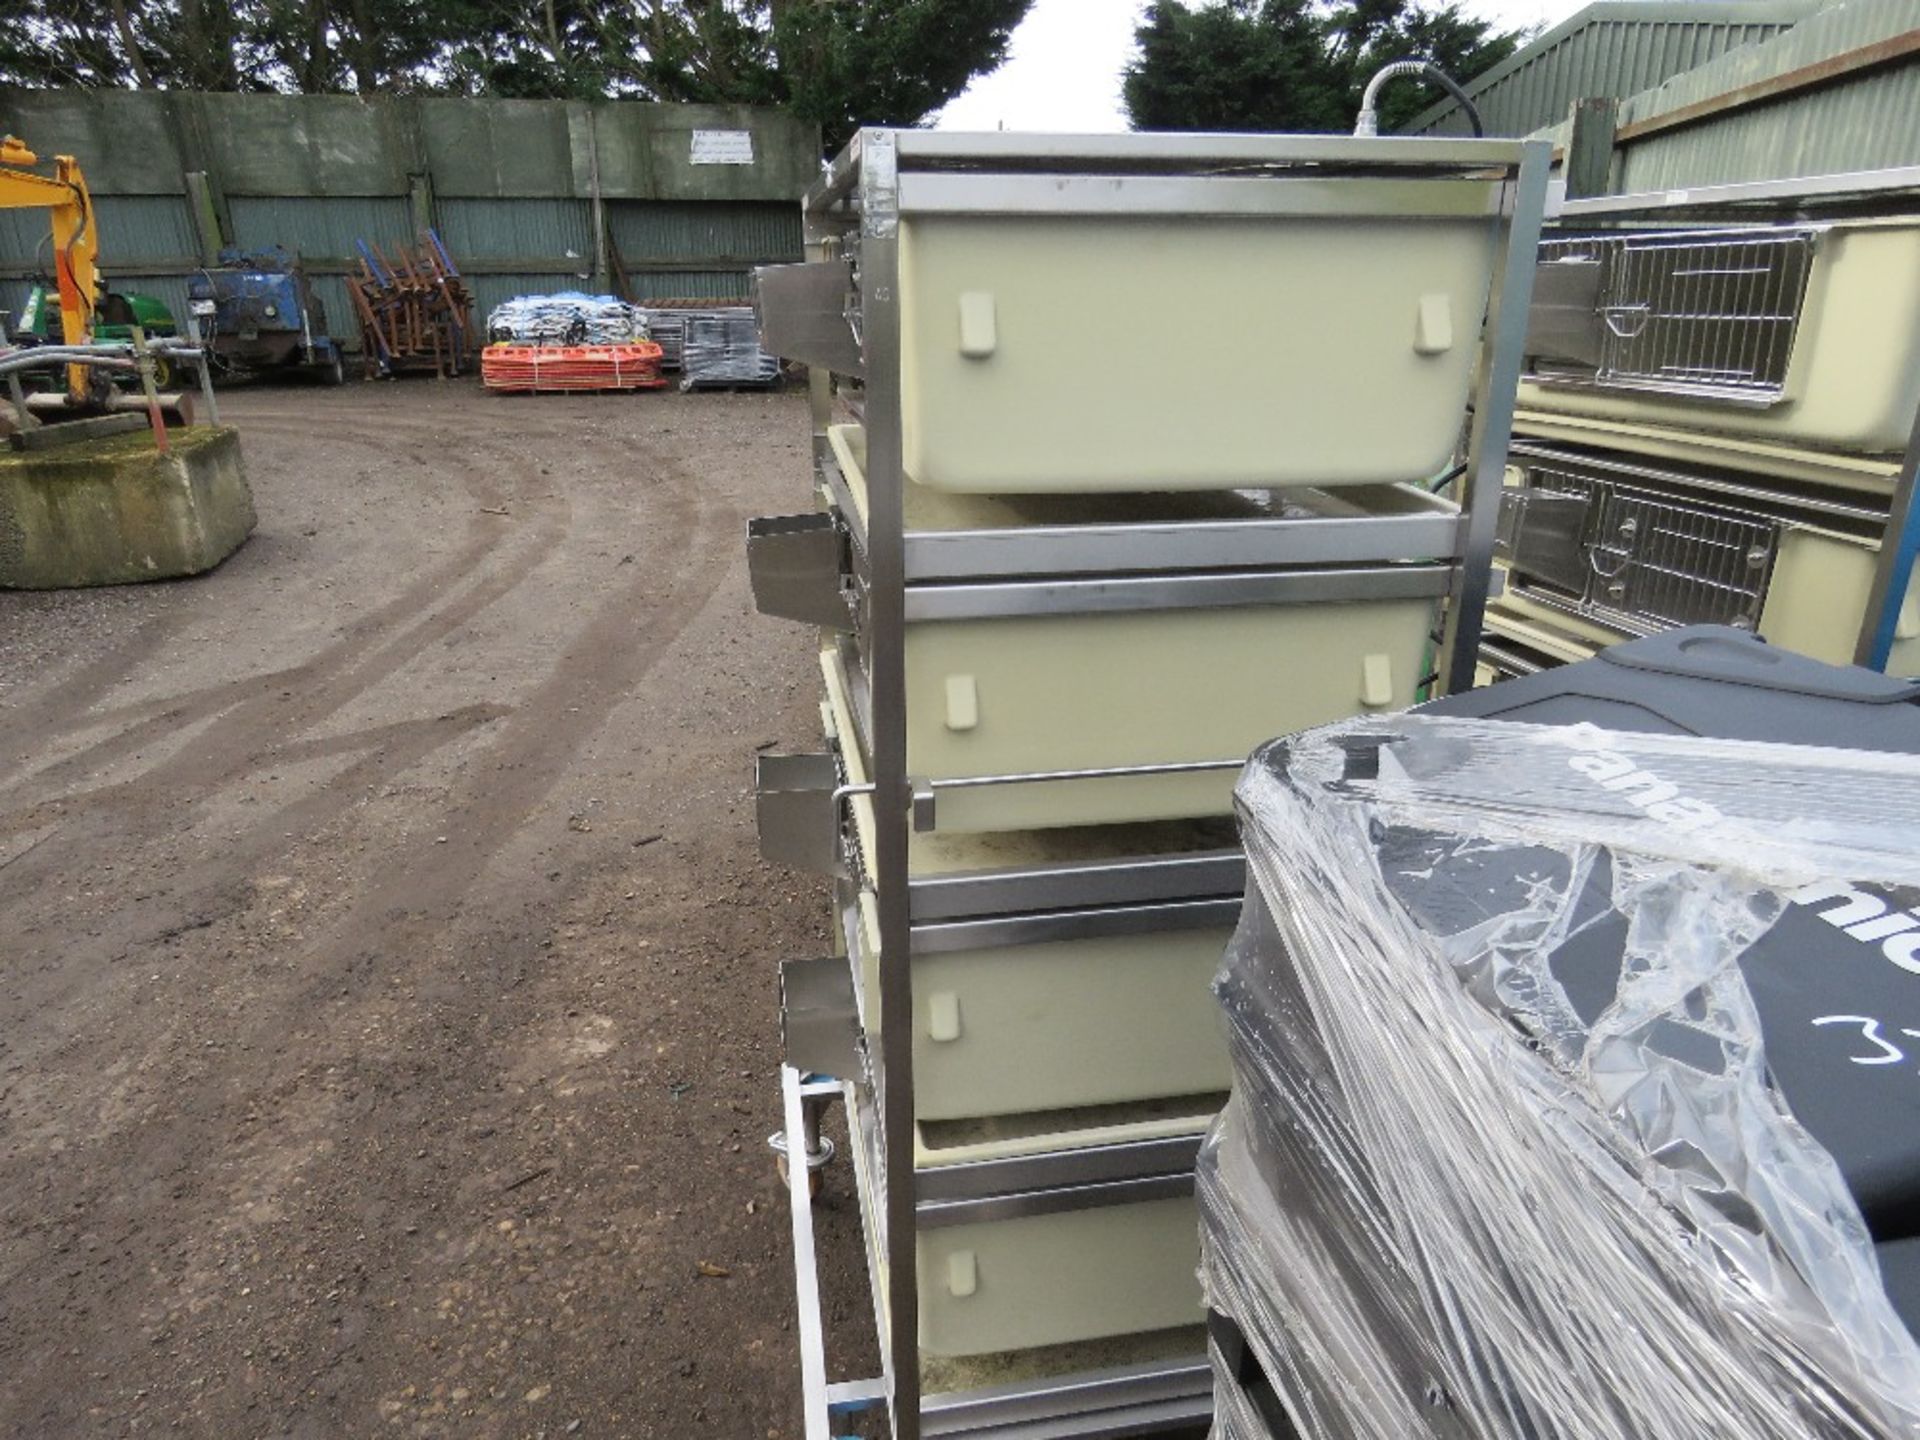 TECNIPLAST WHEELED STAINLESS STEEL TROLLEY FRAME CONTAINING 4 X VETINARY ANIMAL CAGES, LITTLE SIGNS - Image 2 of 3